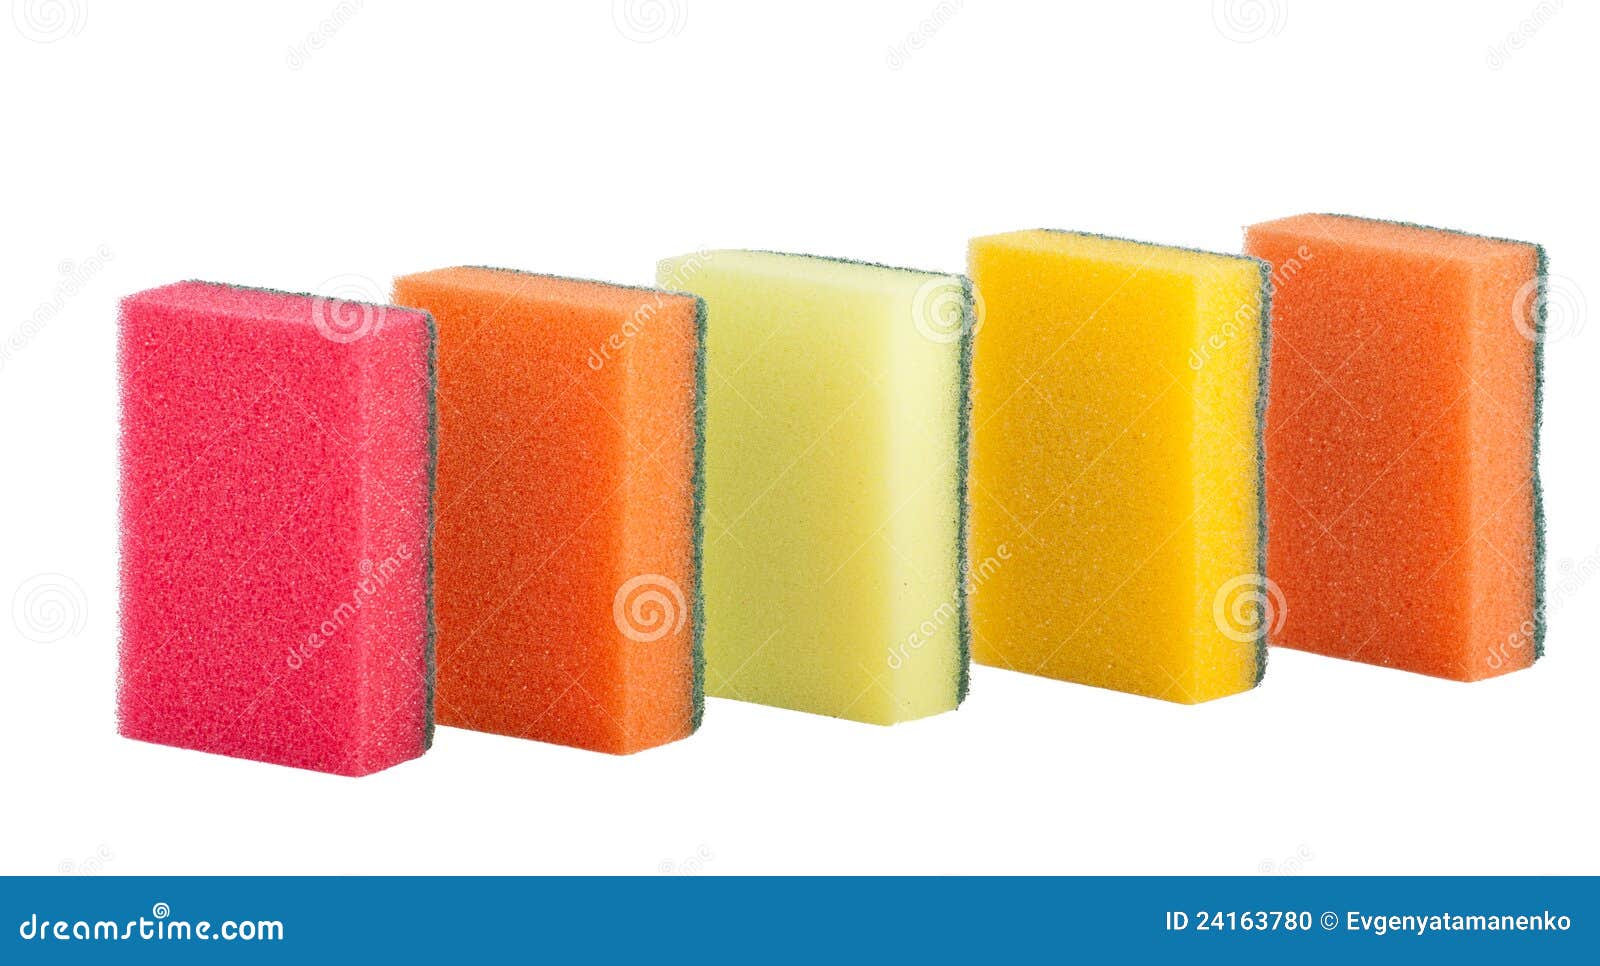 https://thumbs.dreamstime.com/z/group-kitchen-colorful-sponges-isolated-24163780.jpg